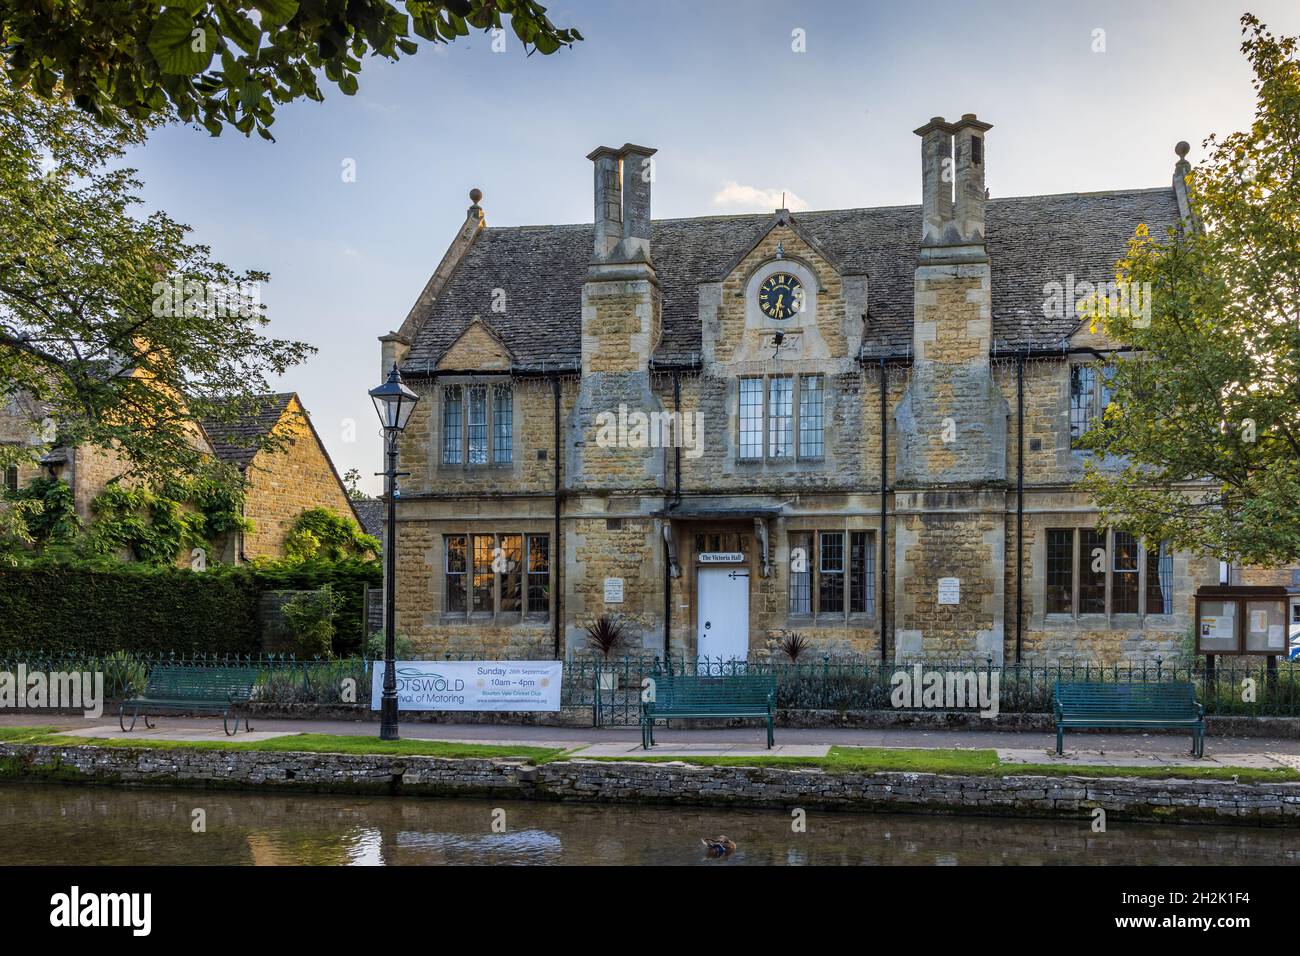 The Victoria Hall named after Queen Victoria (built 1897) in the Cotswold village of Bourton on the Water, Gloucestershire, England. Stock Photo